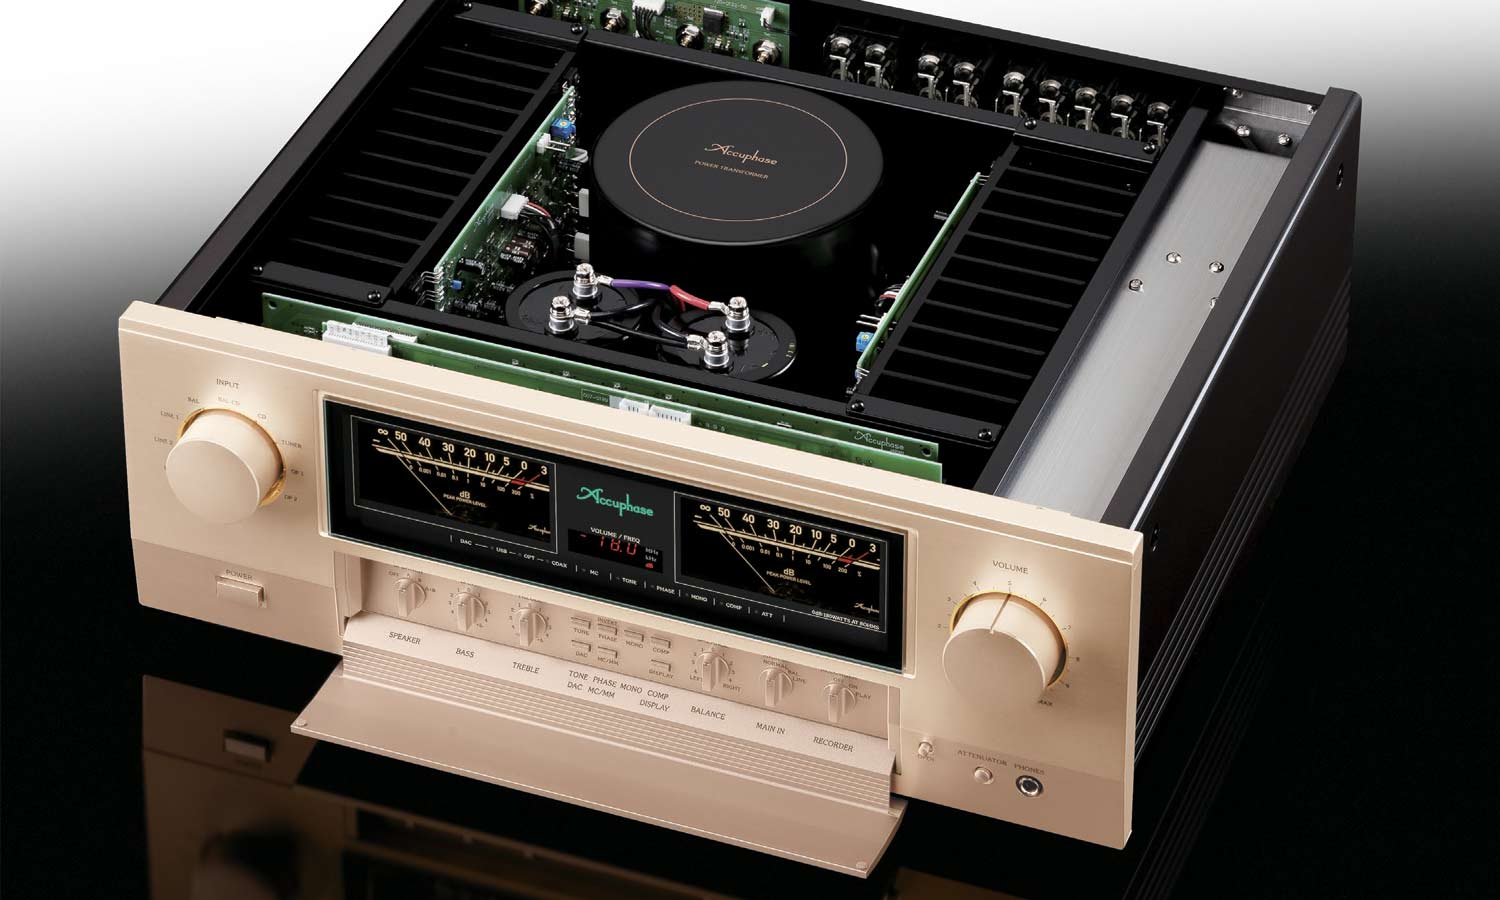 Accuphase E-4000 Integrated Stereo Amplifier